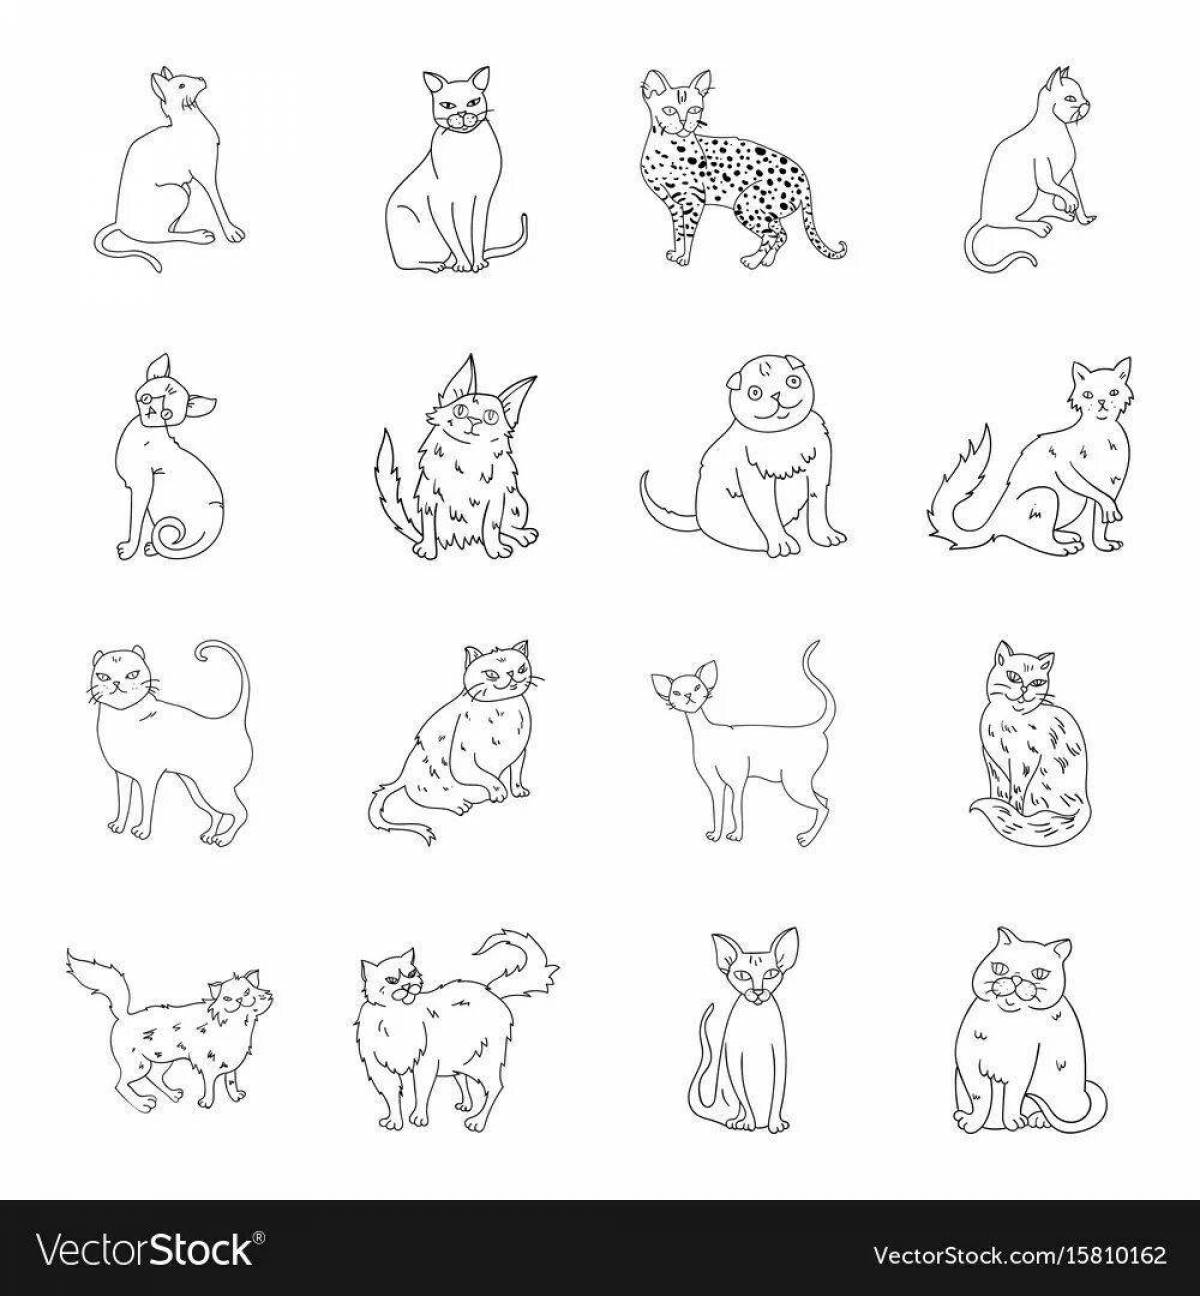 Fun cat sticker coloring page